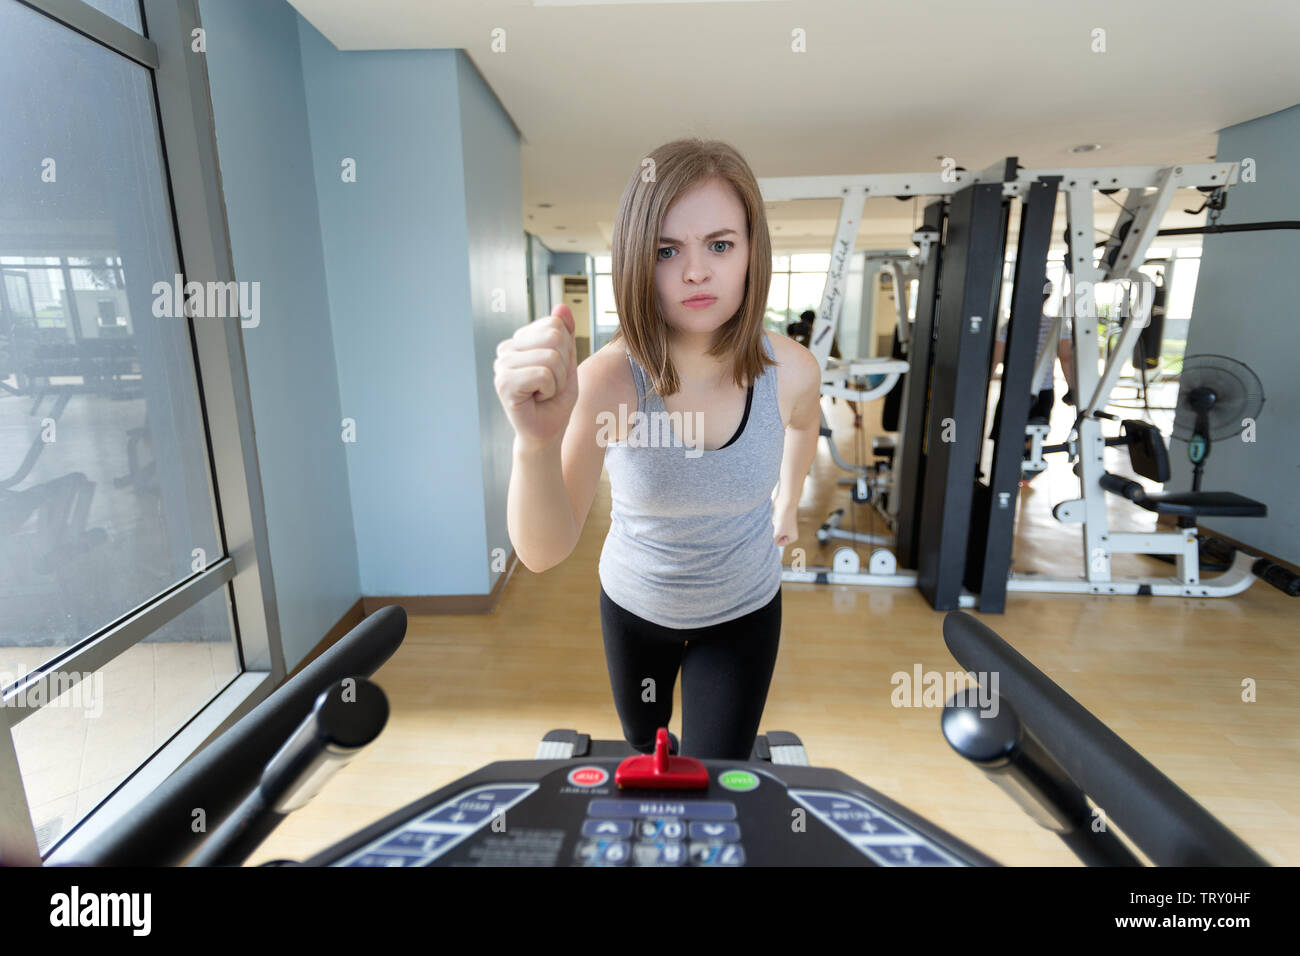 Young caucasian woman girl isrunning jogging on the treadmill at the gym, doing cardio workout Stock Photo